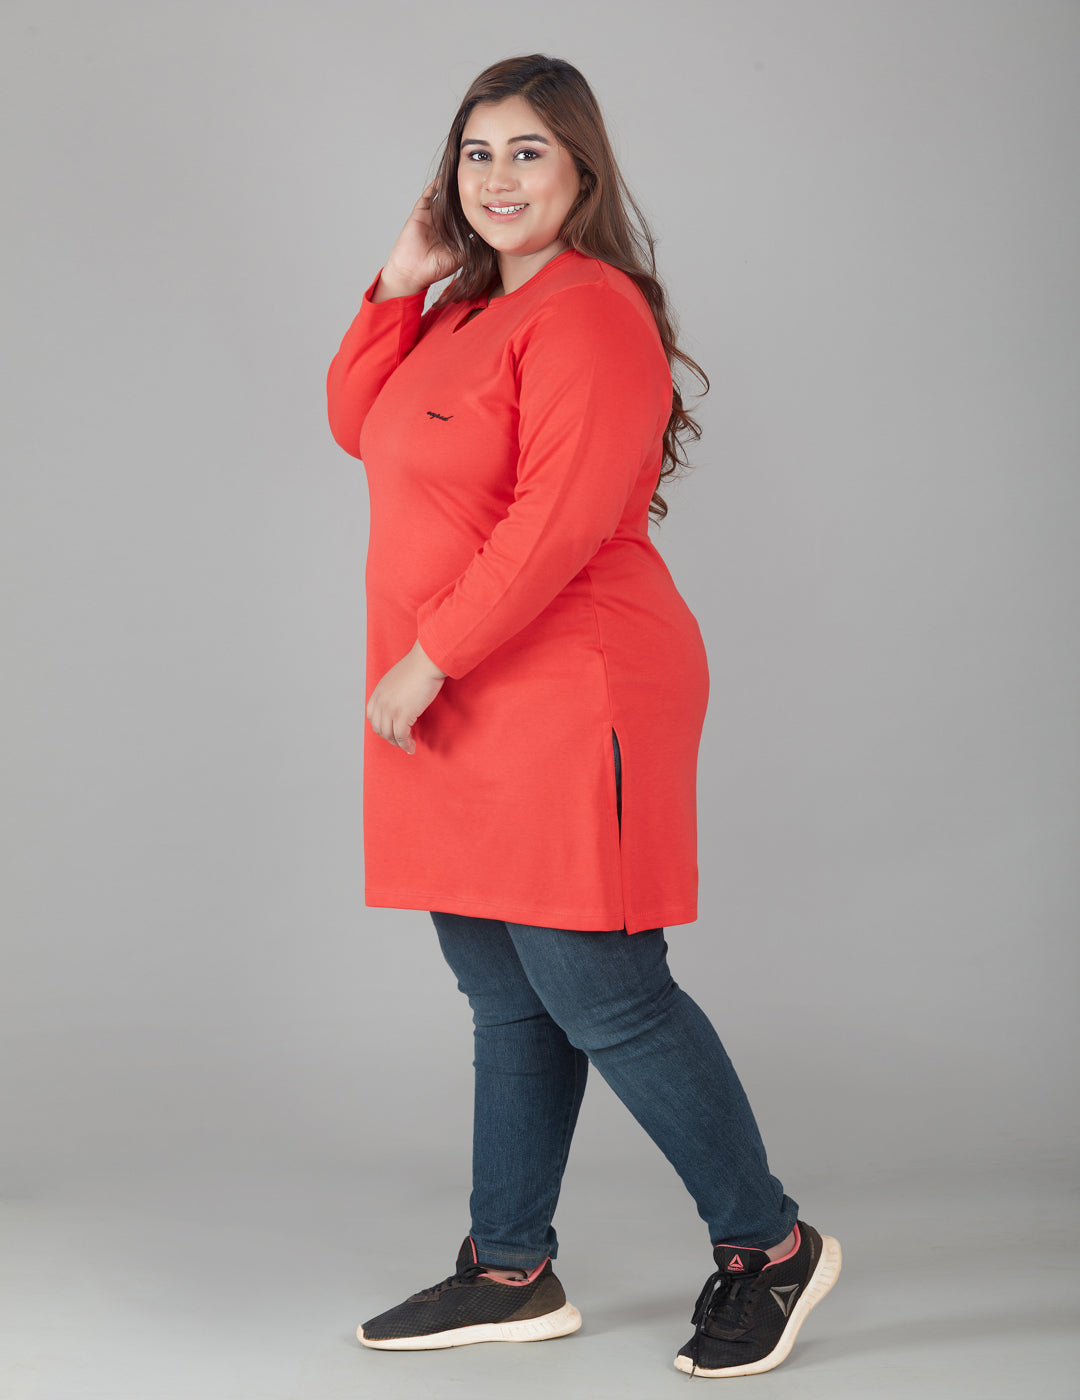 Stylish Red Cotton Full Sleeves Long Tops For Women in Plus Size at best prices